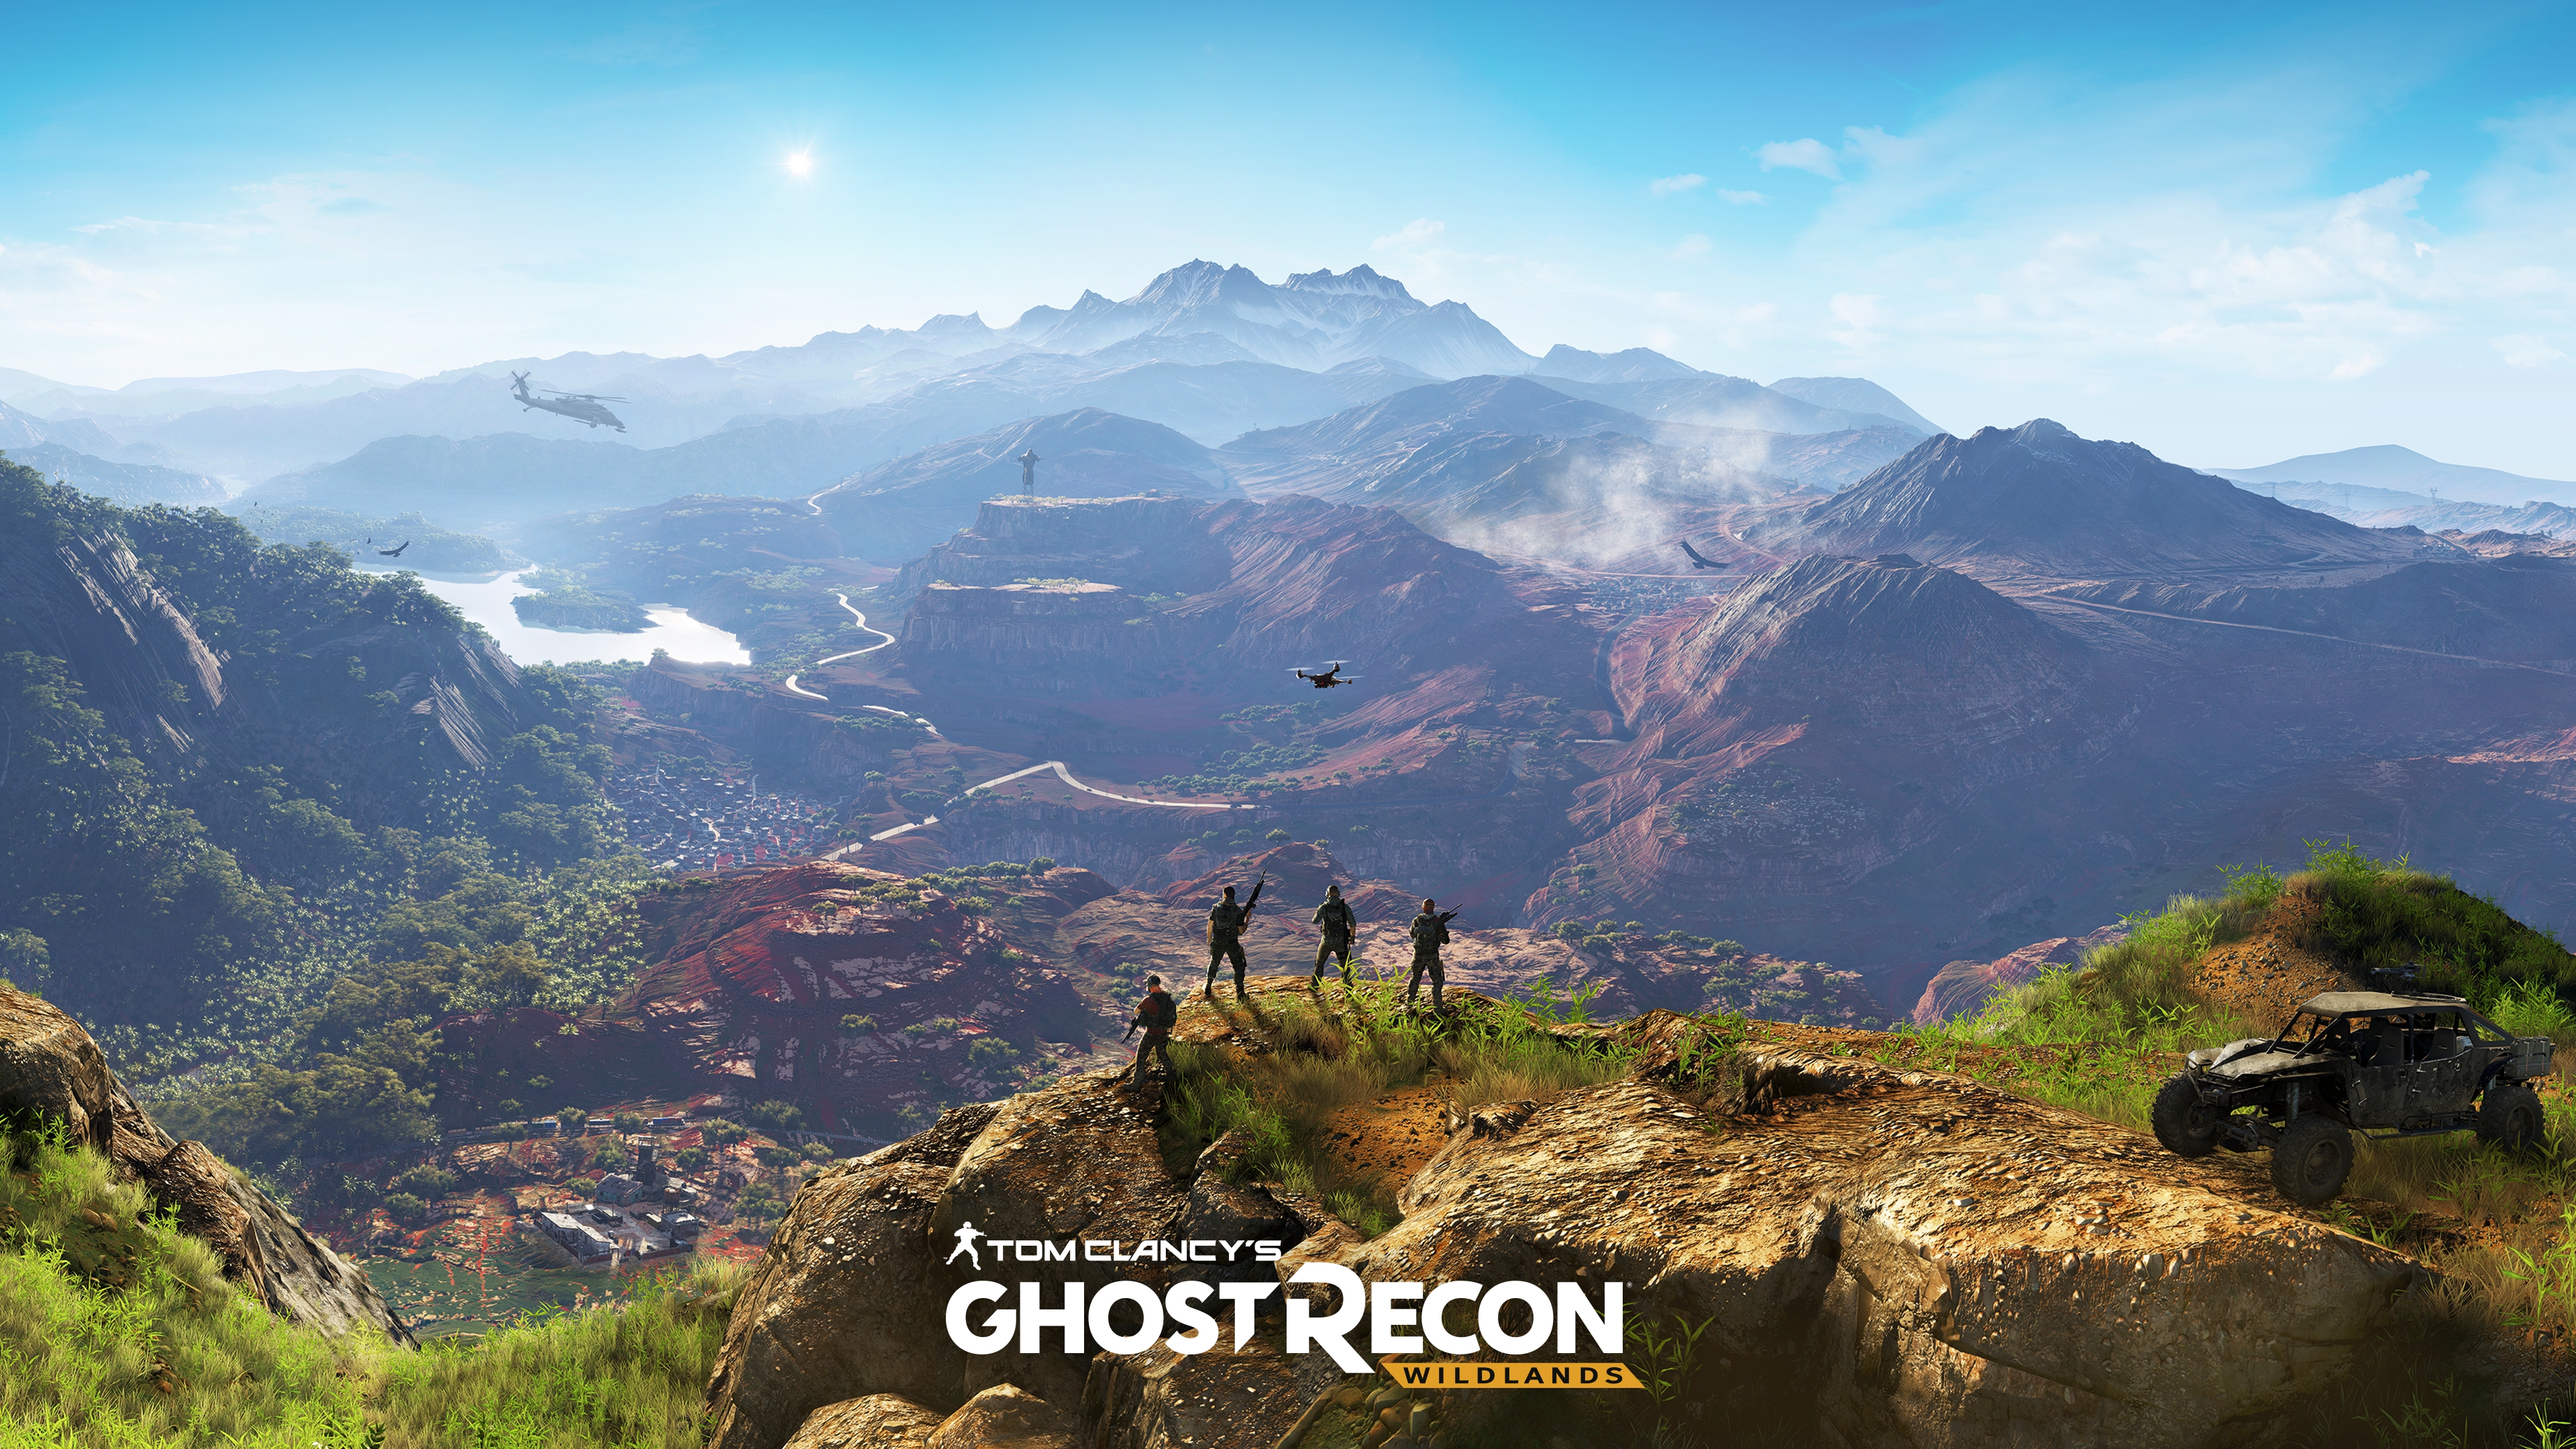 What is Ghost Recon Wildlands?